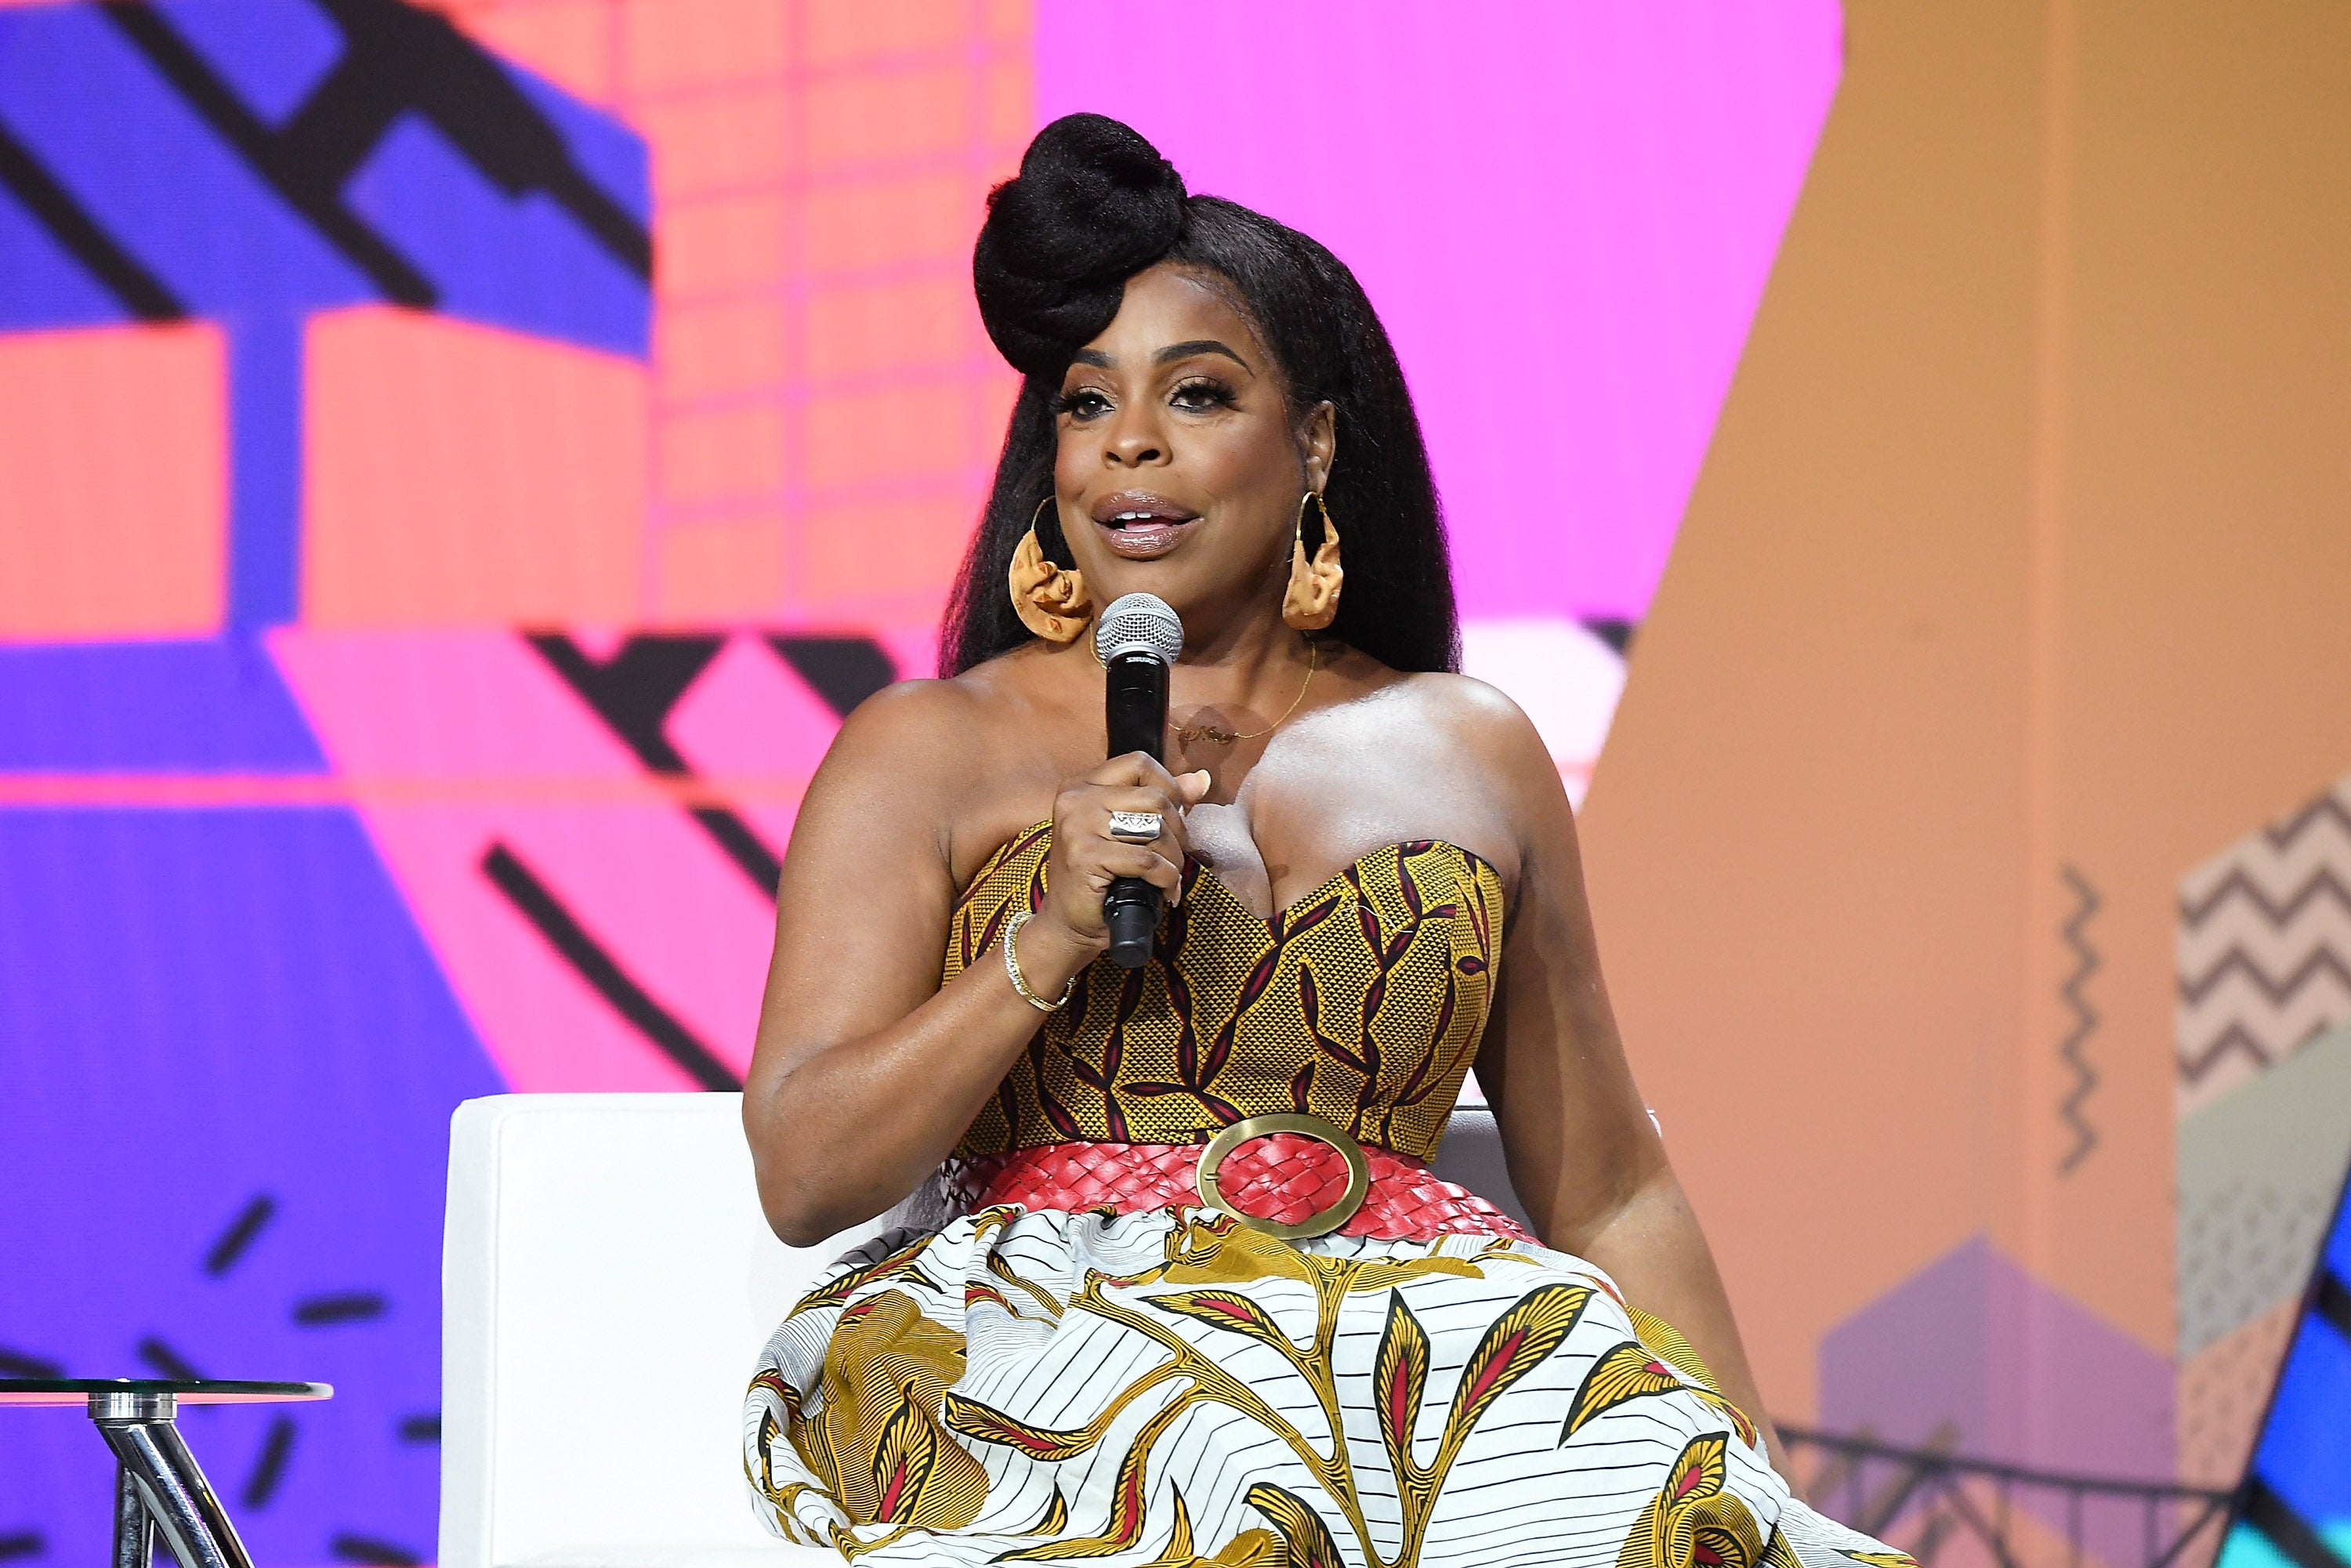 Niecy Nash and Courtney B. Vance To Portray The Beauty Of Black Fatherhood In Netflix’s 'Uncorked'